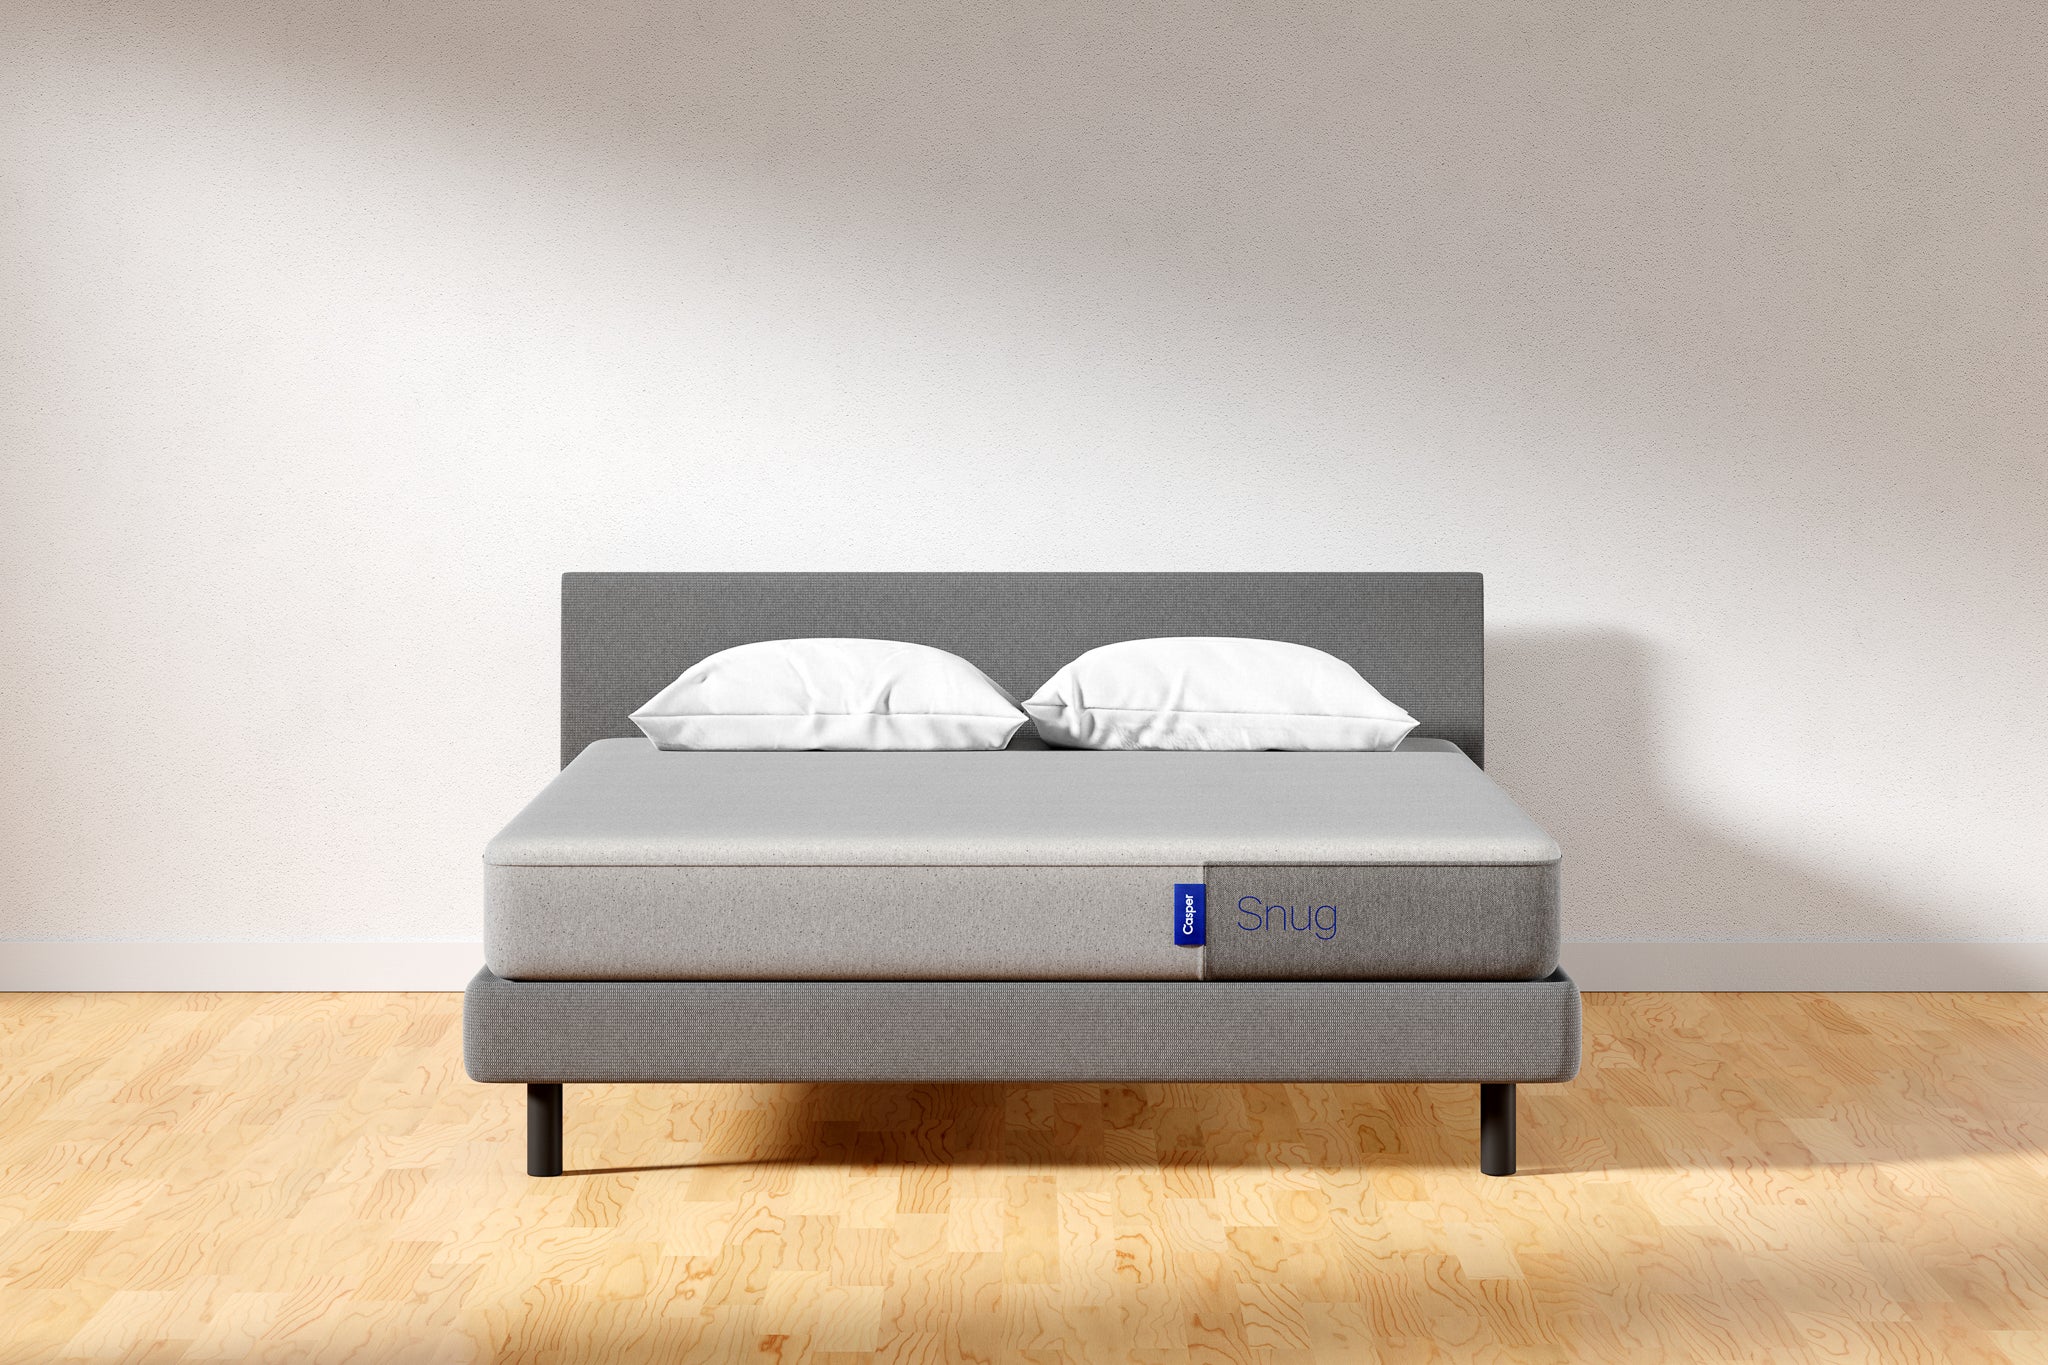 Factors Affecting How Long A Casper Mattress Can Stay In The Box